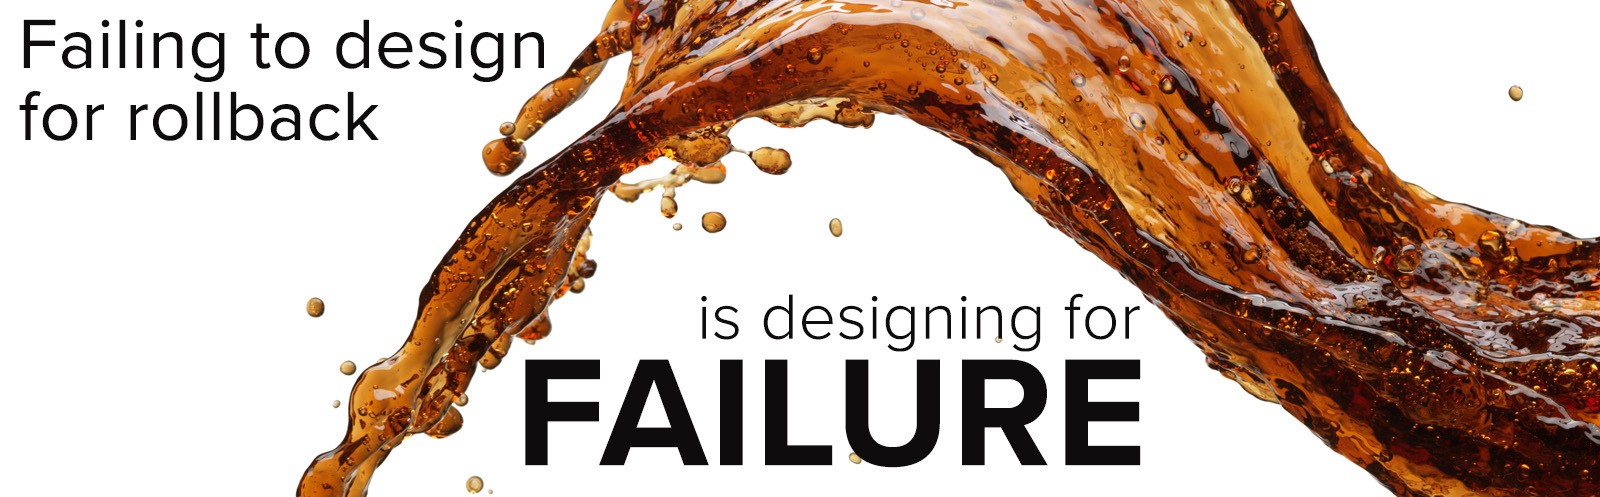 Failing to design for rollback is designing for failure